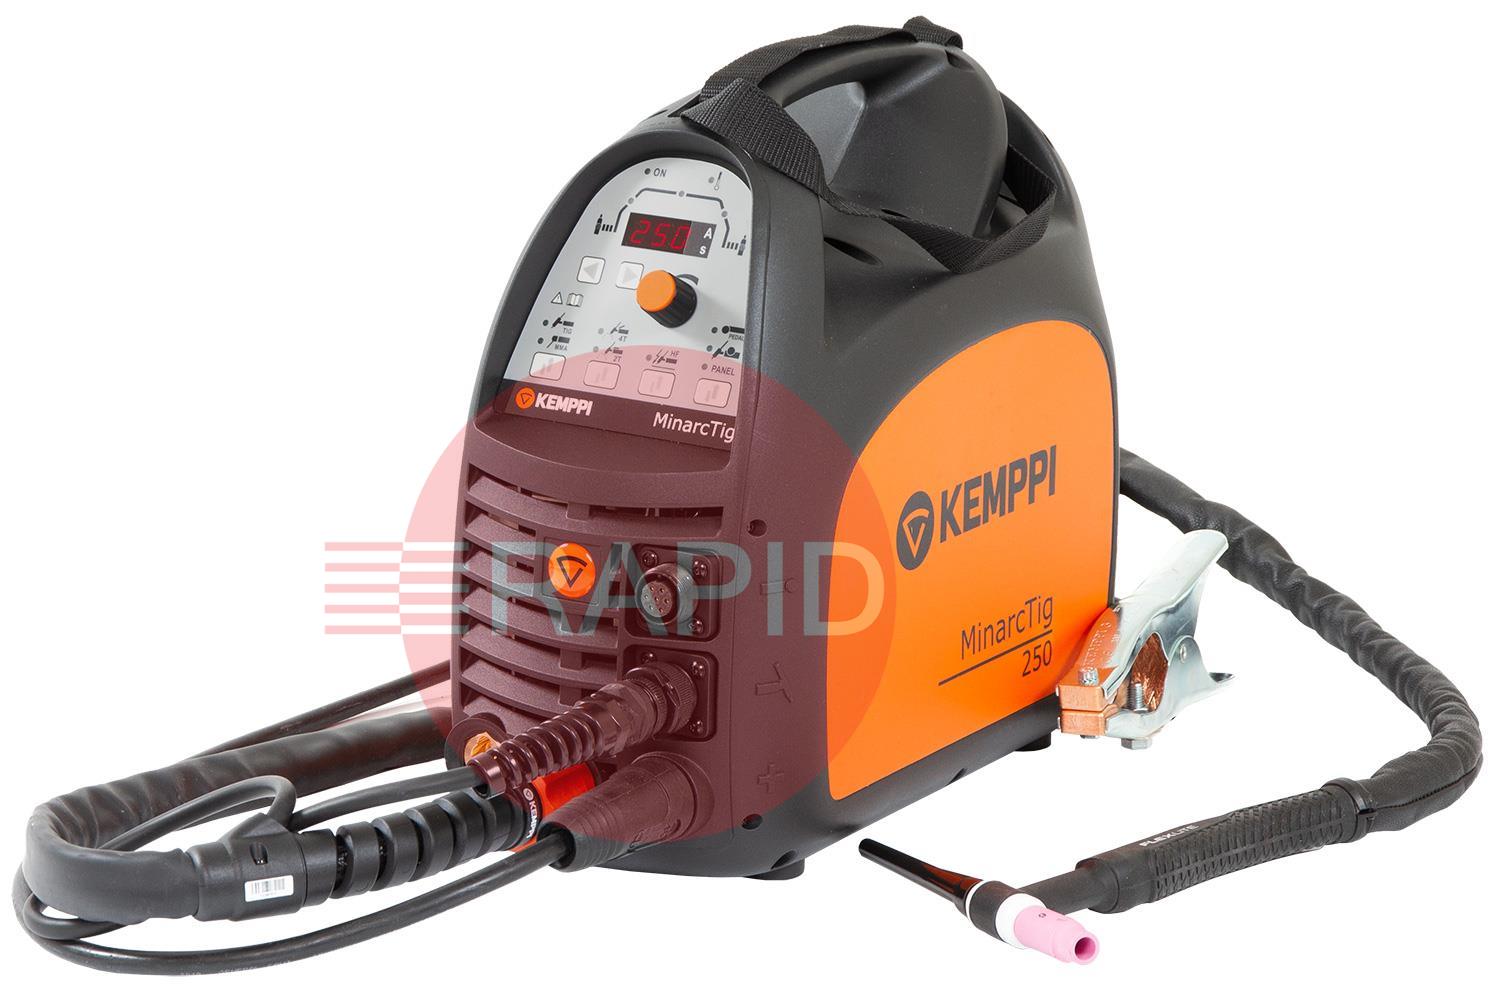 P0609TX  Kemppi MinarcTig 250 with 4m TX225G4 Torch, Earth Cable & Gas Hose